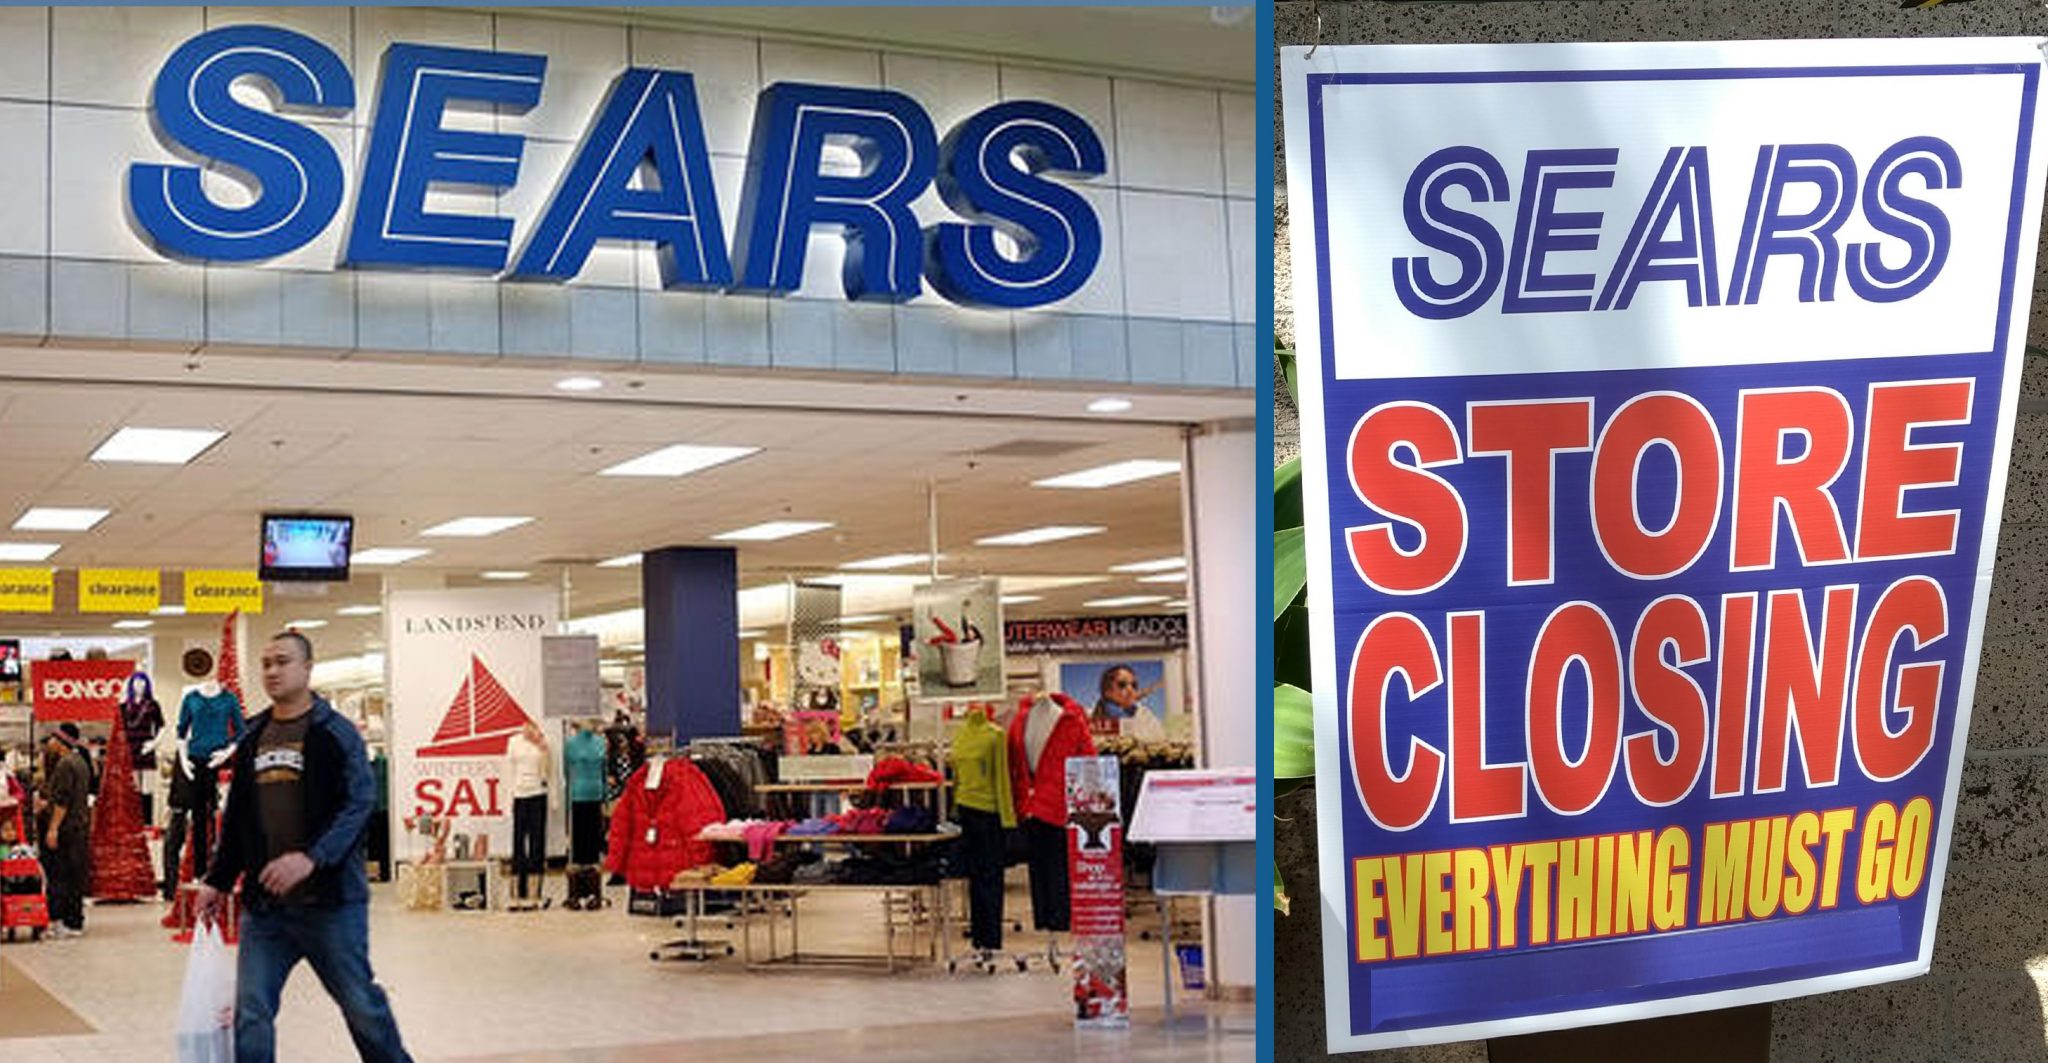 Sears Announces Another 46 Stores Are Closing